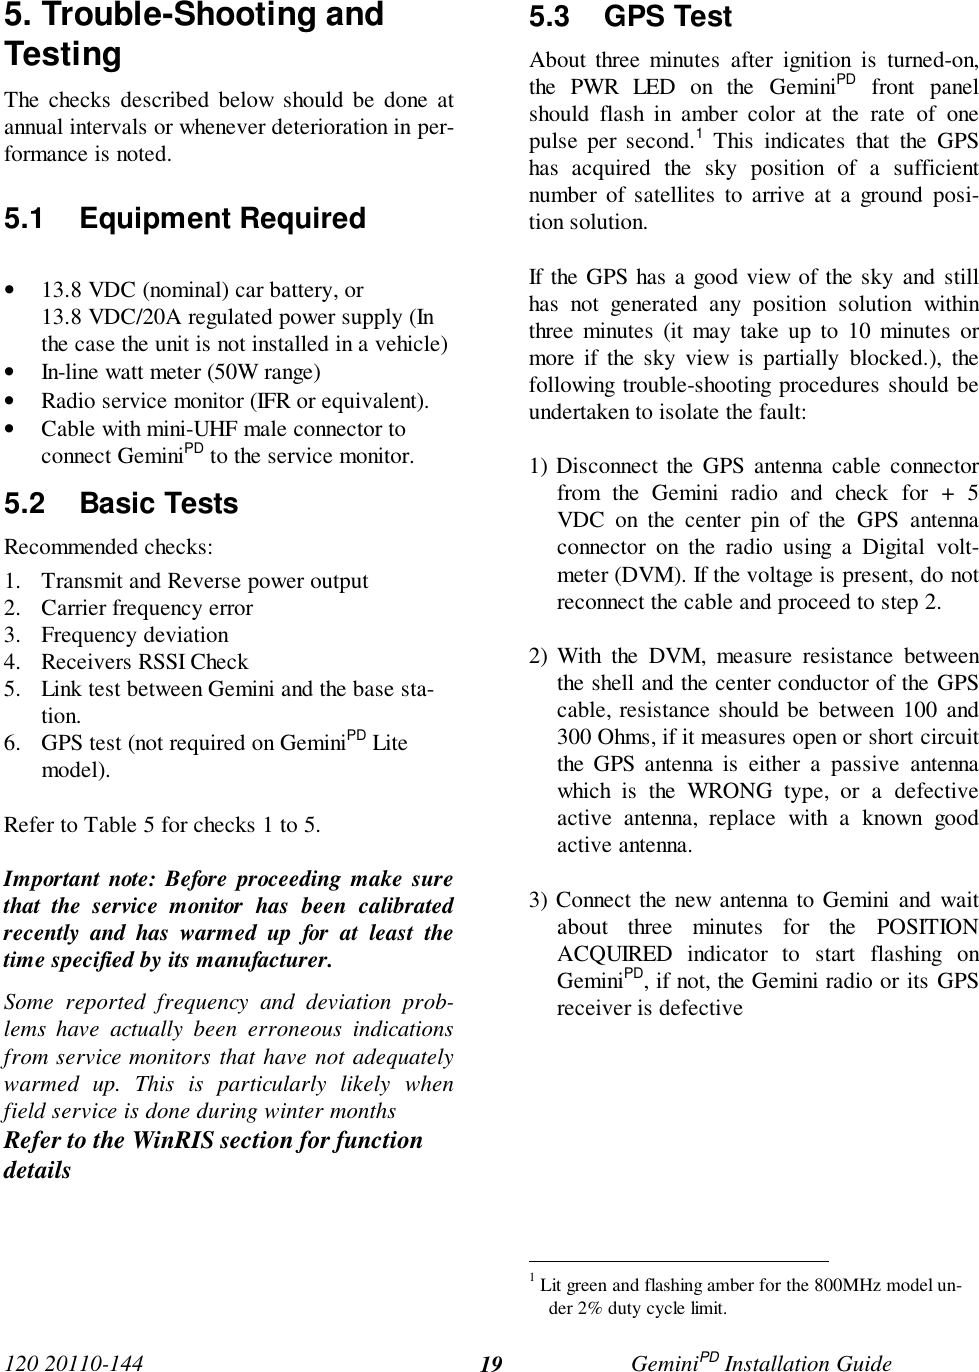 120 20110-144 GeminiPD Installation Guide195. Trouble-Shooting andTestingThe checks described below should be done atannual intervals or whenever deterioration in per-formance is noted.5.1 Equipment Required• 13.8 VDC (nominal) car battery, or13.8 VDC/20A regulated power supply (Inthe case the unit is not installed in a vehicle)• In-line watt meter (50W range)• Radio service monitor (IFR or equivalent).• Cable with mini-UHF male connector toconnect GeminiPD to the service monitor.5.2 Basic TestsRecommended checks:1. Transmit and Reverse power output2. Carrier frequency error3. Frequency deviation4. Receivers RSSI Check5. Link test between Gemini and the base sta-tion.6. GPS test (not required on GeminiPD Litemodel).Refer to Table 5 for checks 1 to 5.Important note: Before proceeding make surethat the service monitor has been calibratedrecently and has warmed up for at least thetime specified by its manufacturer.Some reported frequency and deviation prob-lems have actually been erroneous indicationsfrom service monitors that have not adequatelywarmed up. This is particularly likely whenfield service is done during winter monthsRefer to the WinRIS section for functiondetails5.3 GPS TestAbout three minutes after ignition is turned-on,the PWR LED on the GeminiPD front panelshould flash in amber color at the rate of onepulse per second.1 This indicates that the GPShas acquired the sky position of a sufficientnumber of satellites to arrive at a ground posi-tion solution.If the GPS has a good view of the sky and stillhas not generated any position solution withinthree minutes (it may take up to 10 minutes ormore if the sky view is partially blocked.), thefollowing trouble-shooting procedures should beundertaken to isolate the fault:1) Disconnect the GPS antenna cable connectorfrom the Gemini radio and check for + 5VDC on the center pin of the GPS antennaconnector on the radio using a Digital volt-meter (DVM). If the voltage is present, do notreconnect the cable and proceed to step 2.2) With the DVM, measure resistance betweenthe shell and the center conductor of the GPScable, resistance should be between 100 and300 Ohms, if it measures open or short circuitthe GPS antenna is either a passive antennawhich is the WRONG type, or a defectiveactive antenna, replace with a known goodactive antenna.3) Connect the new antenna to Gemini and waitabout three minutes for the POSITIONACQUIRED indicator to start flashing onGeminiPD, if not, the Gemini radio or its GPSreceiver is defective                                                1 Lit green and flashing amber for the 800MHz model un-der 2% duty cycle limit.